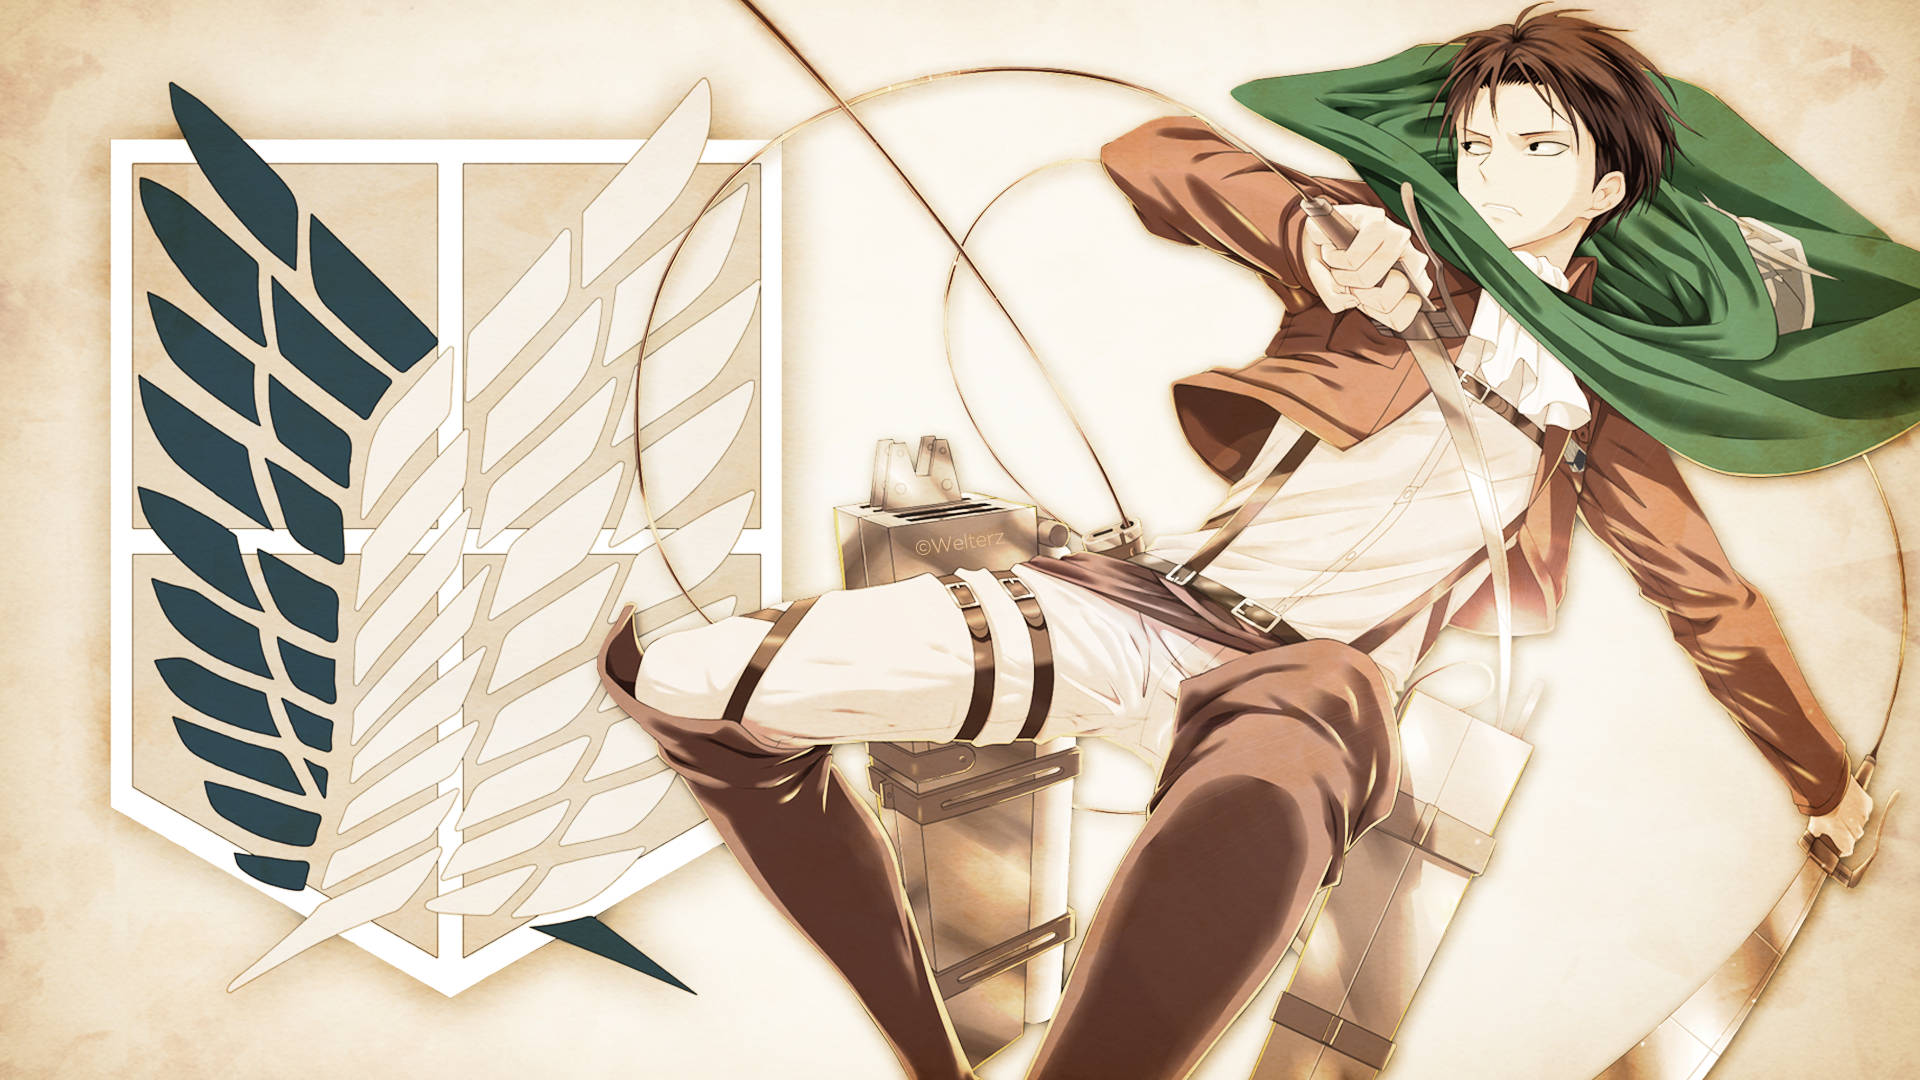 Brave, Determined and Devoted - Levi of the Scouting Legion Wallpaper